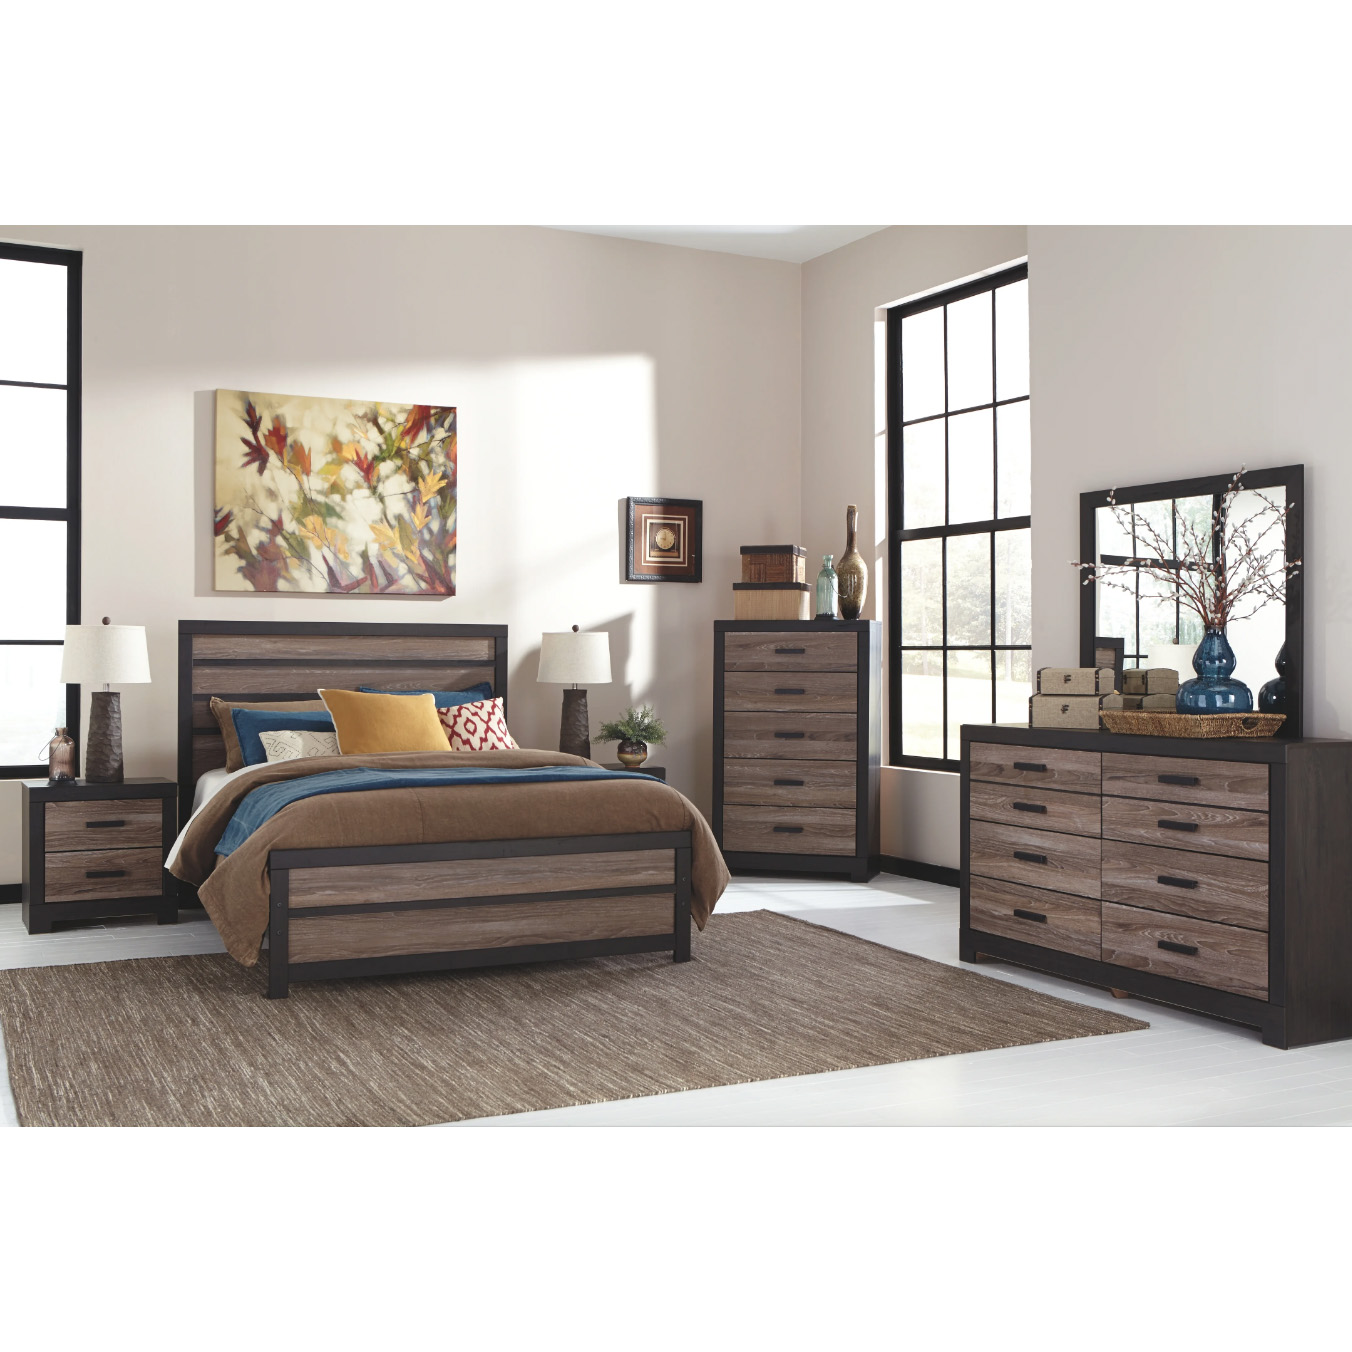 Harlinton - Warm Gray/Charcoal - 6 Pc. - Dresser, Mirror, Chest & Queen Panel Bed